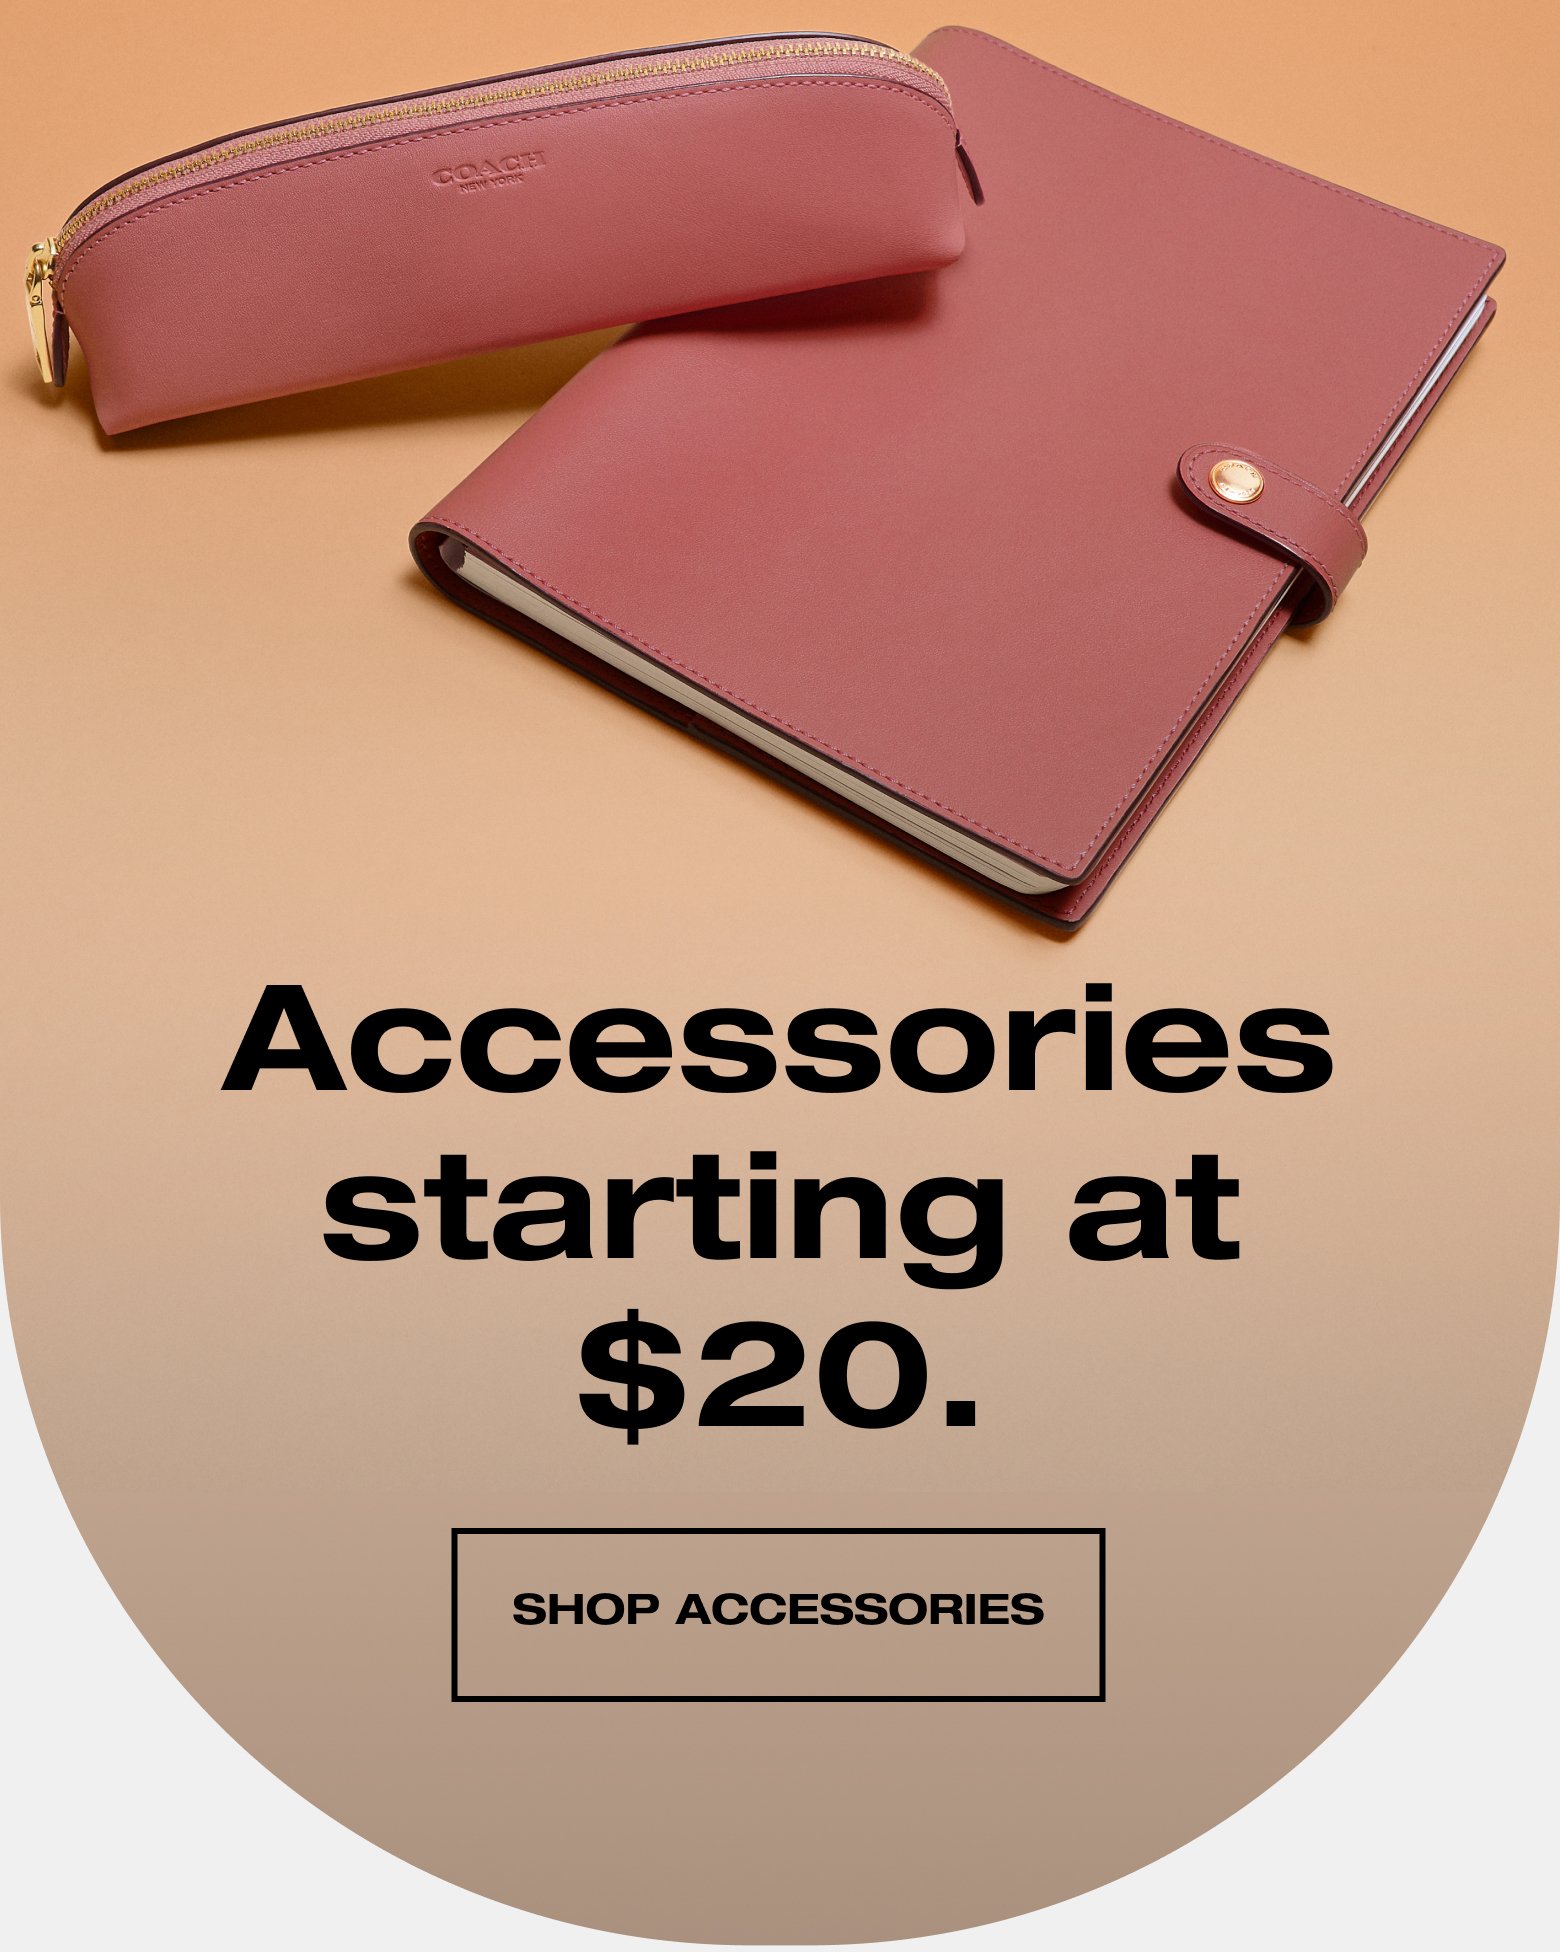 Accessories starting at \\$20. SHOP ACCESSORIES